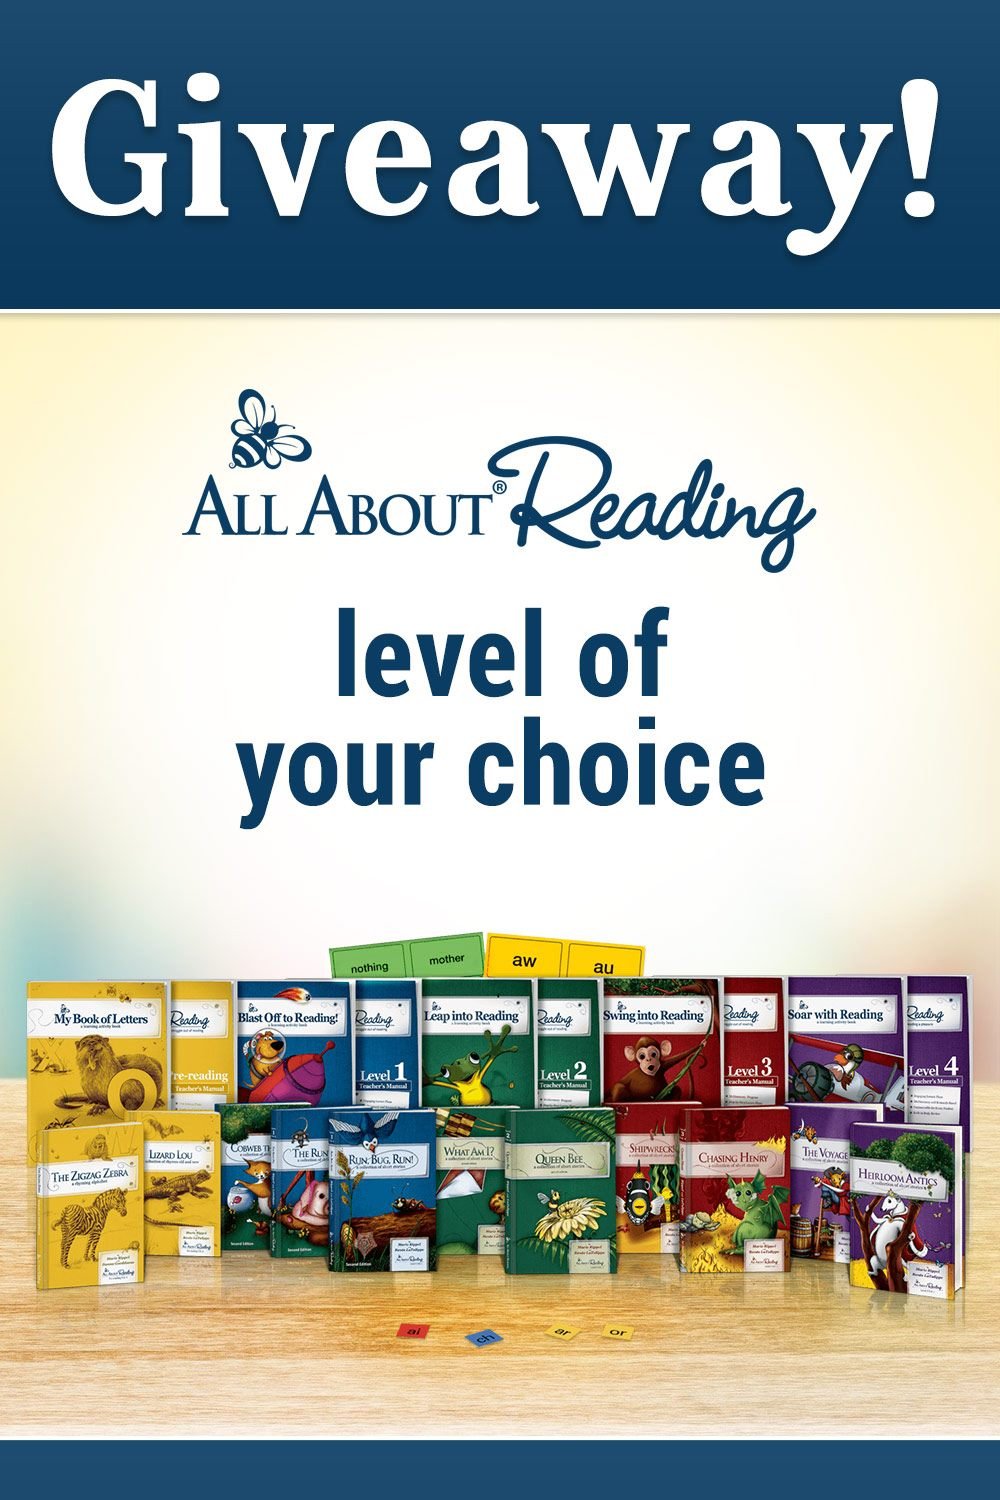 All About Reading Giveaway